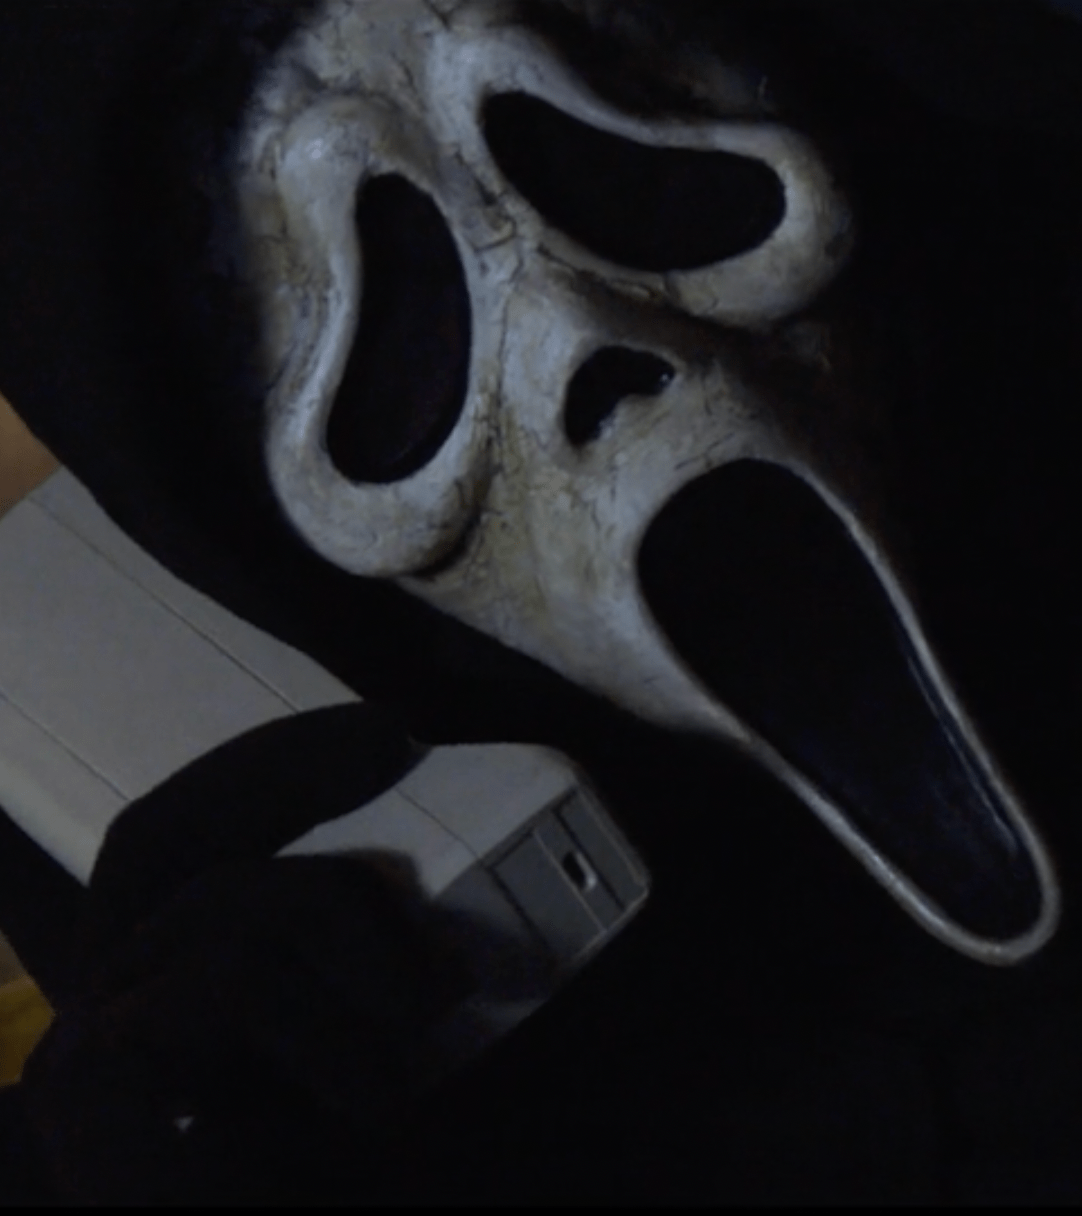 A scream mask is hanging on a door knob. - Ghostface